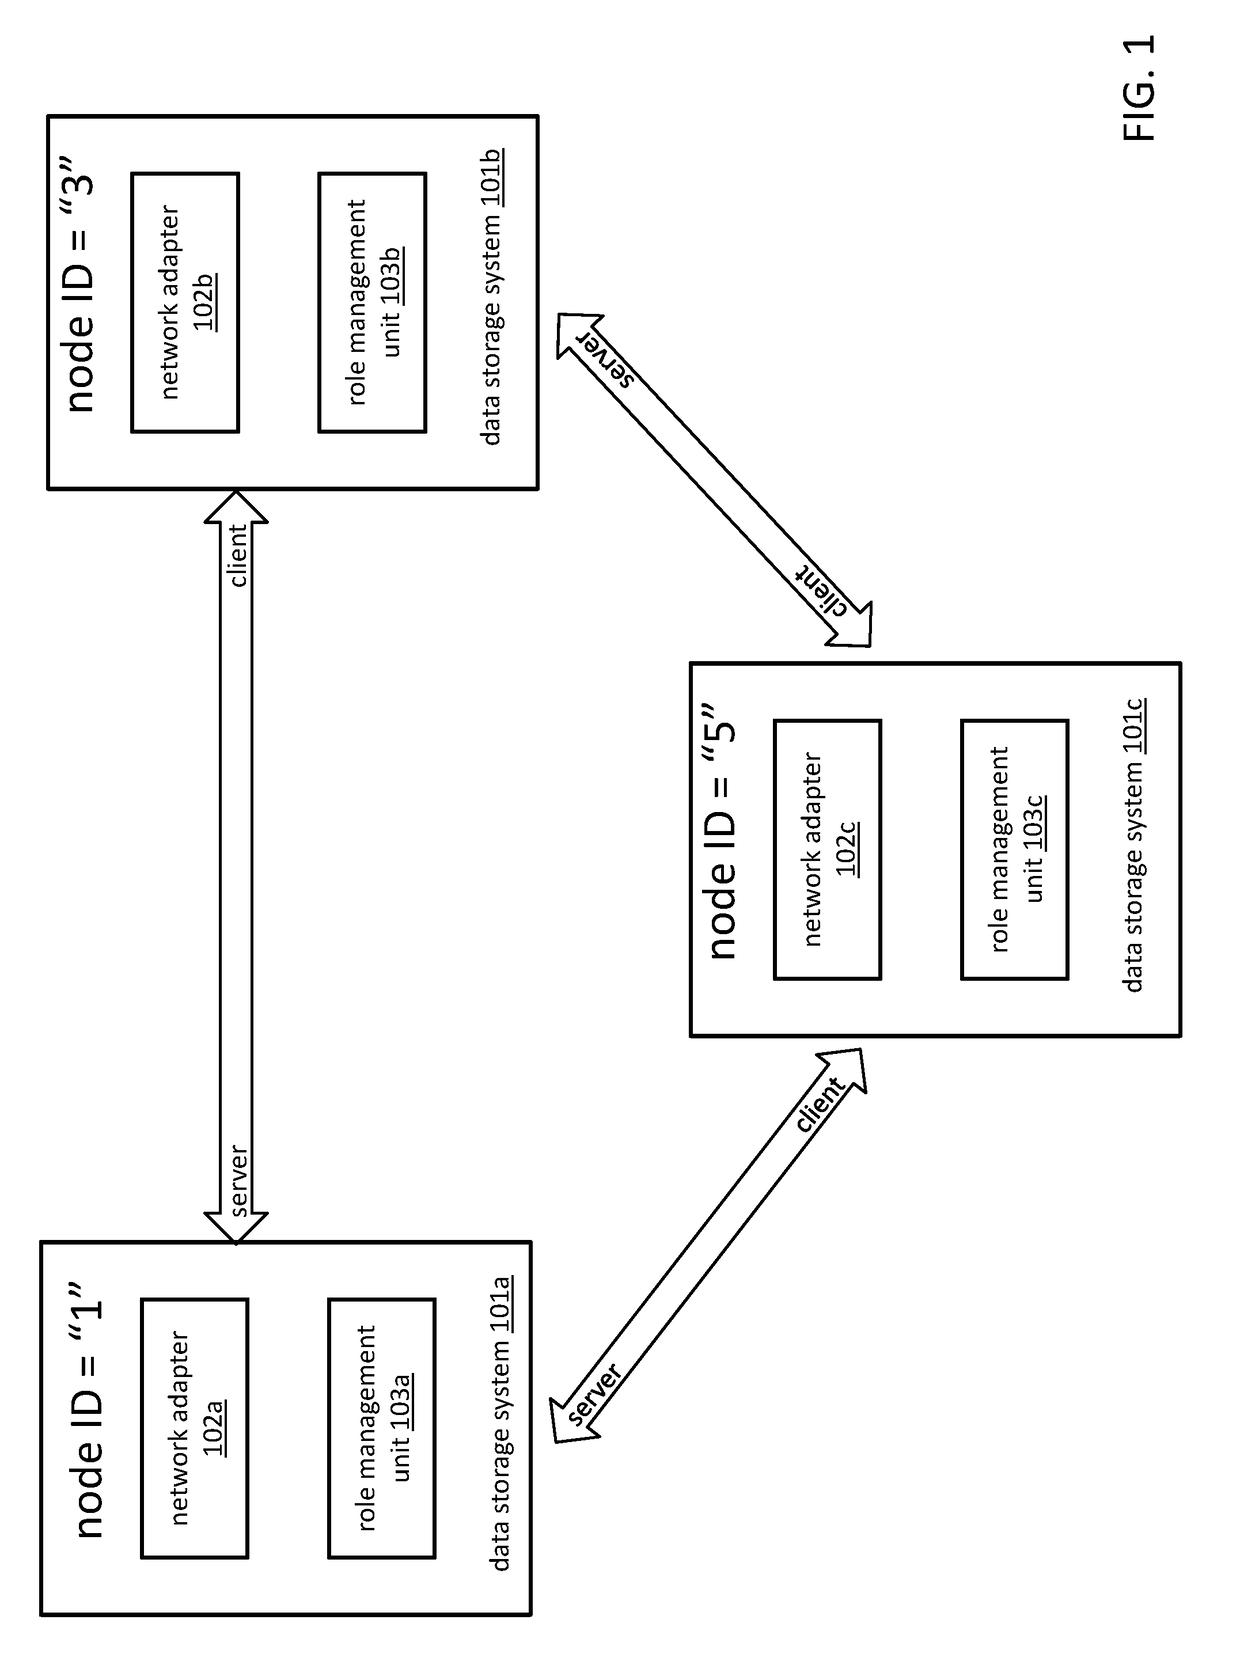 Automatic client-server role detection among data storage systems in a distributed data store